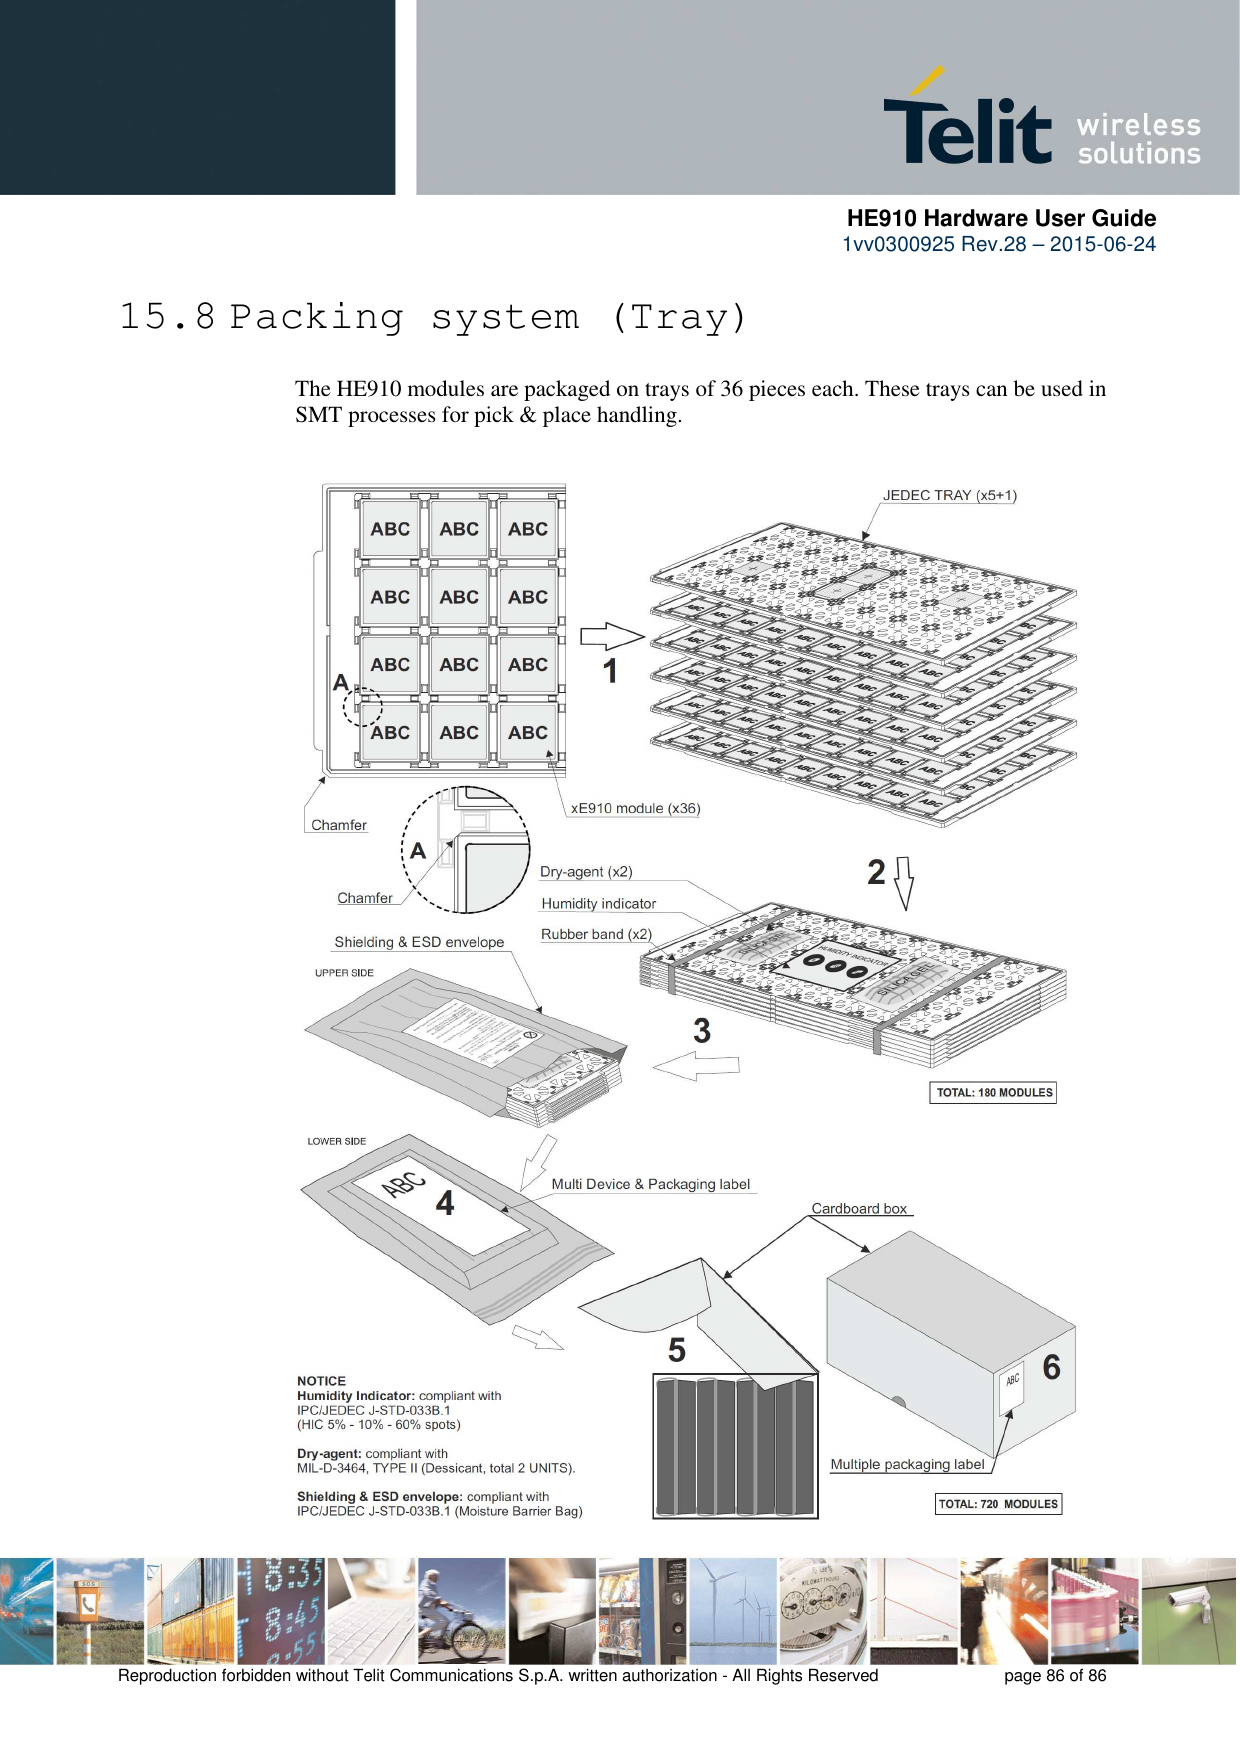      HE910 Hardware User Guide 1vv0300925 Rev.28 – 2015-06-24    Reproduction forbidden without Telit Communications S.p.A. written authorization - All Rights Reserved    page 86 of 86  15.8 Packing system (Tray)  The HE910 modules are packaged on trays of 36 pieces each. These trays can be used in SMT processes for pick &amp; place handling.   